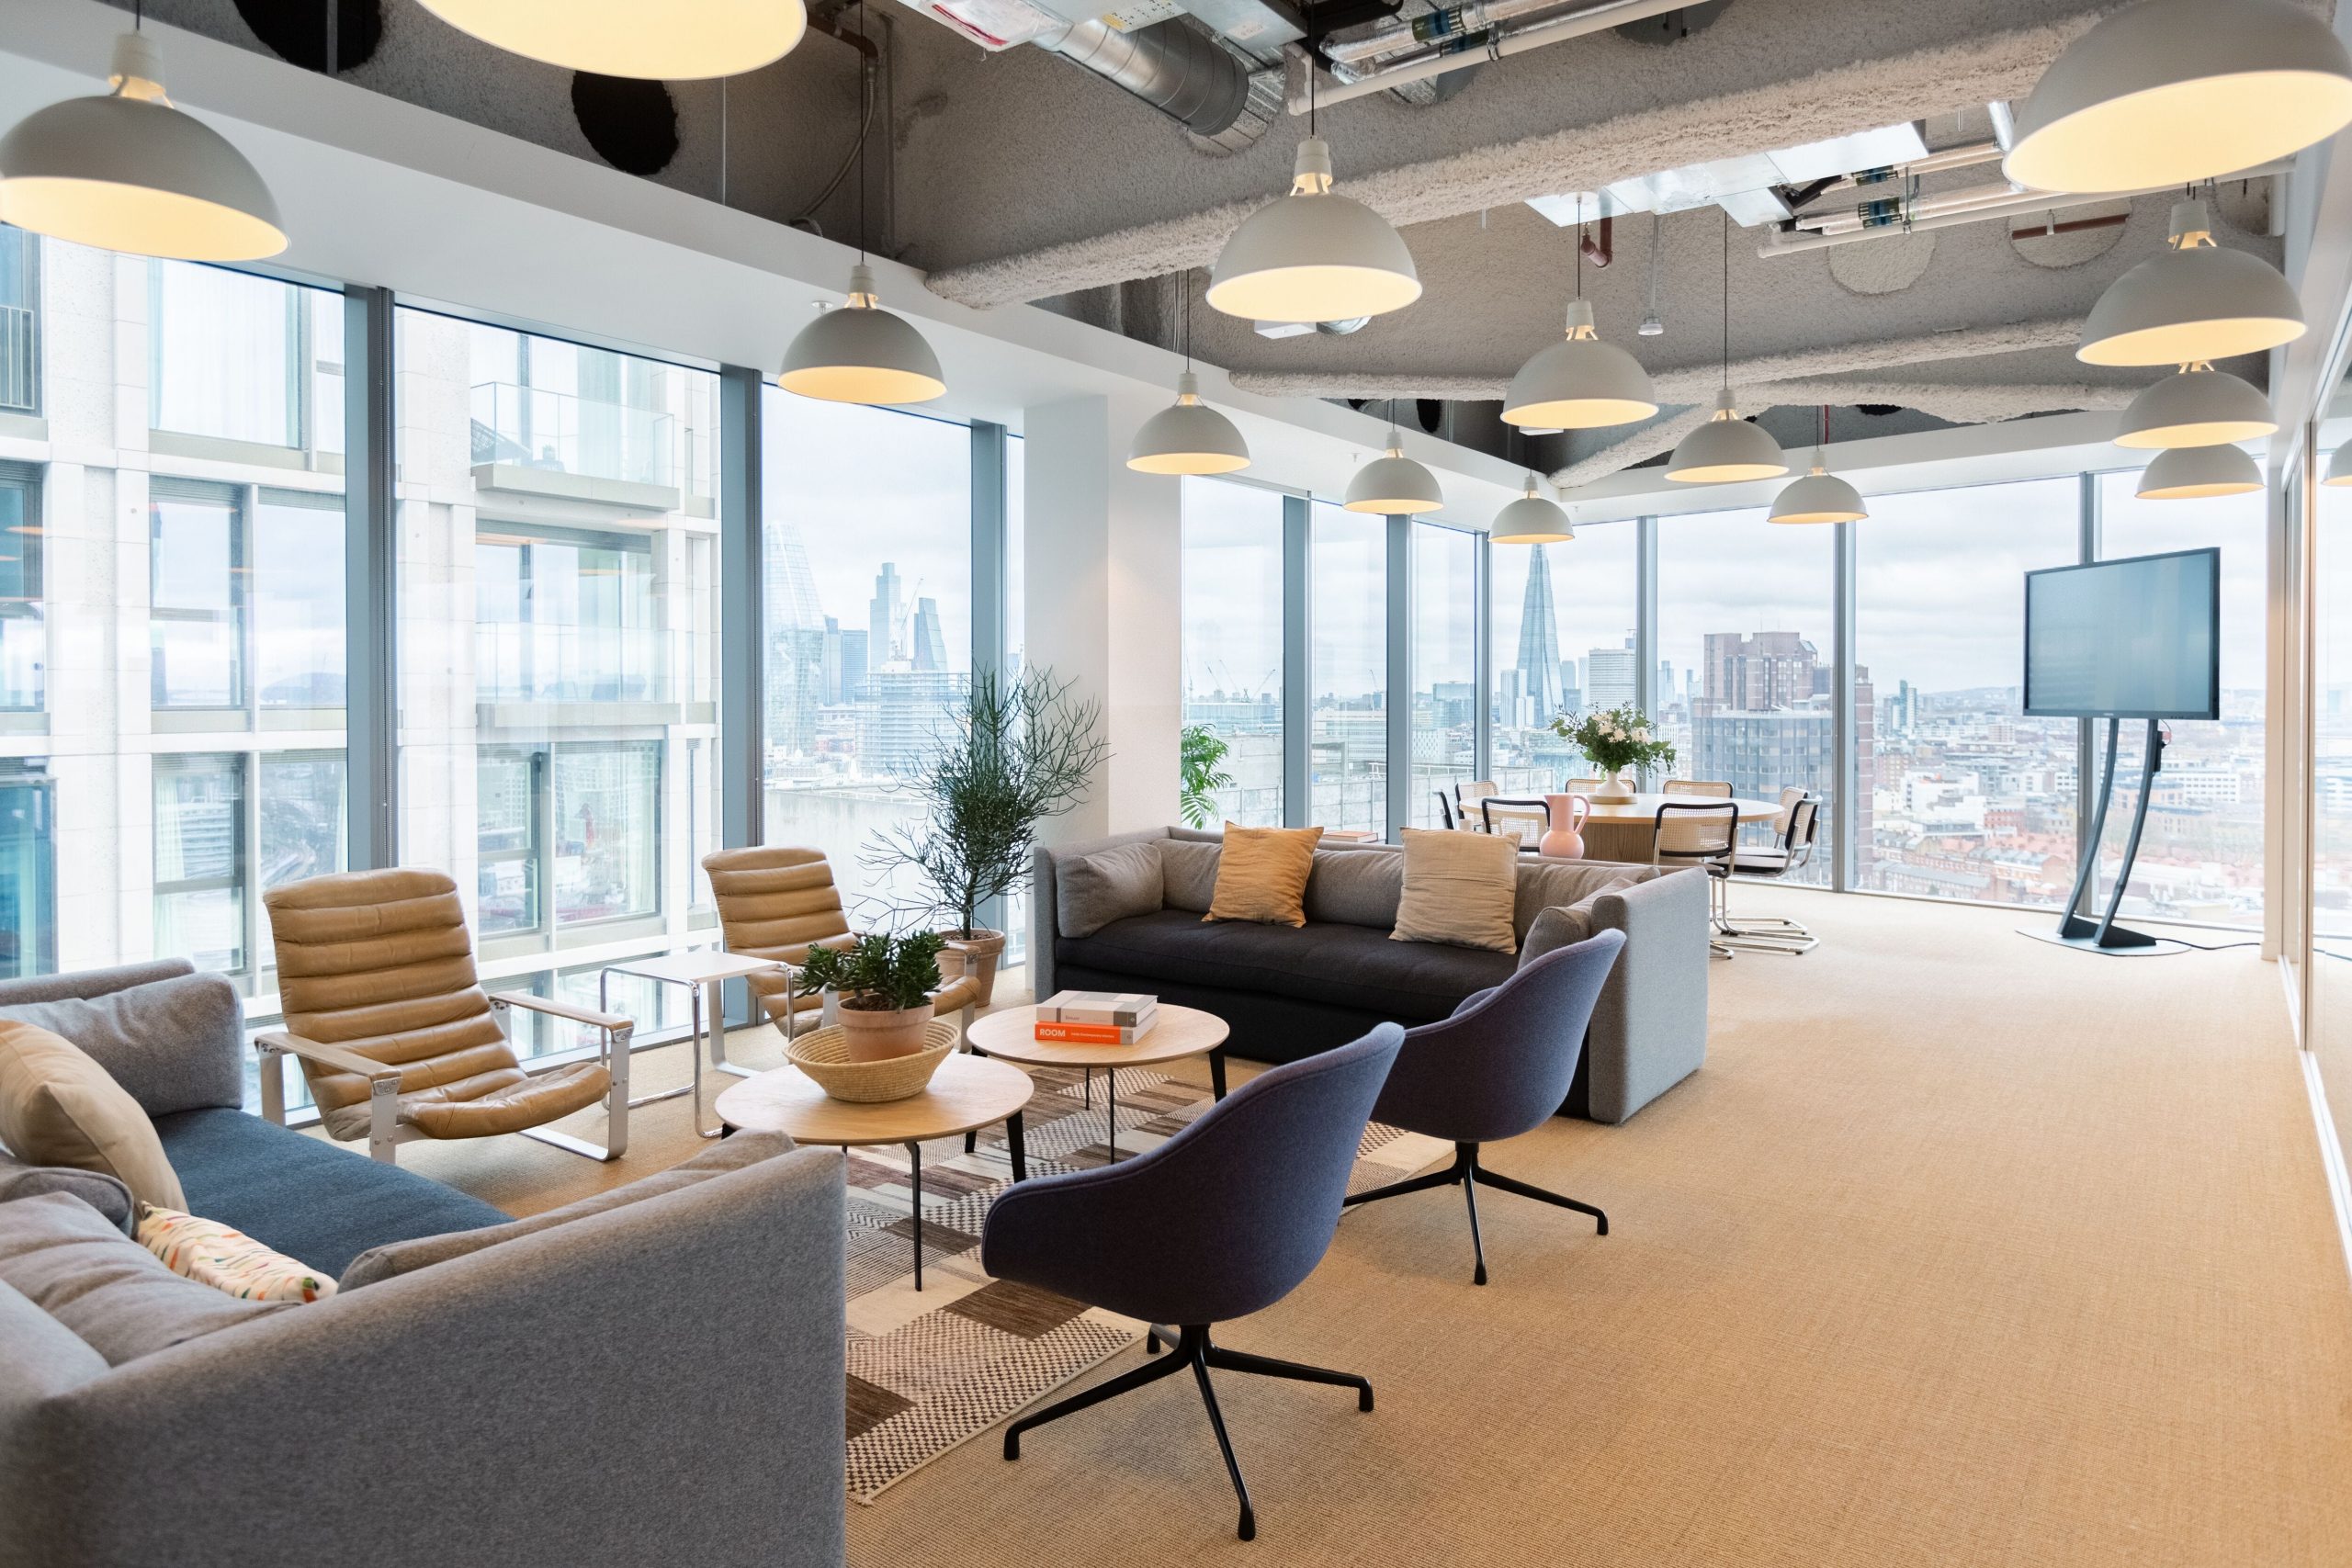 A WeWork collaboration hub in London